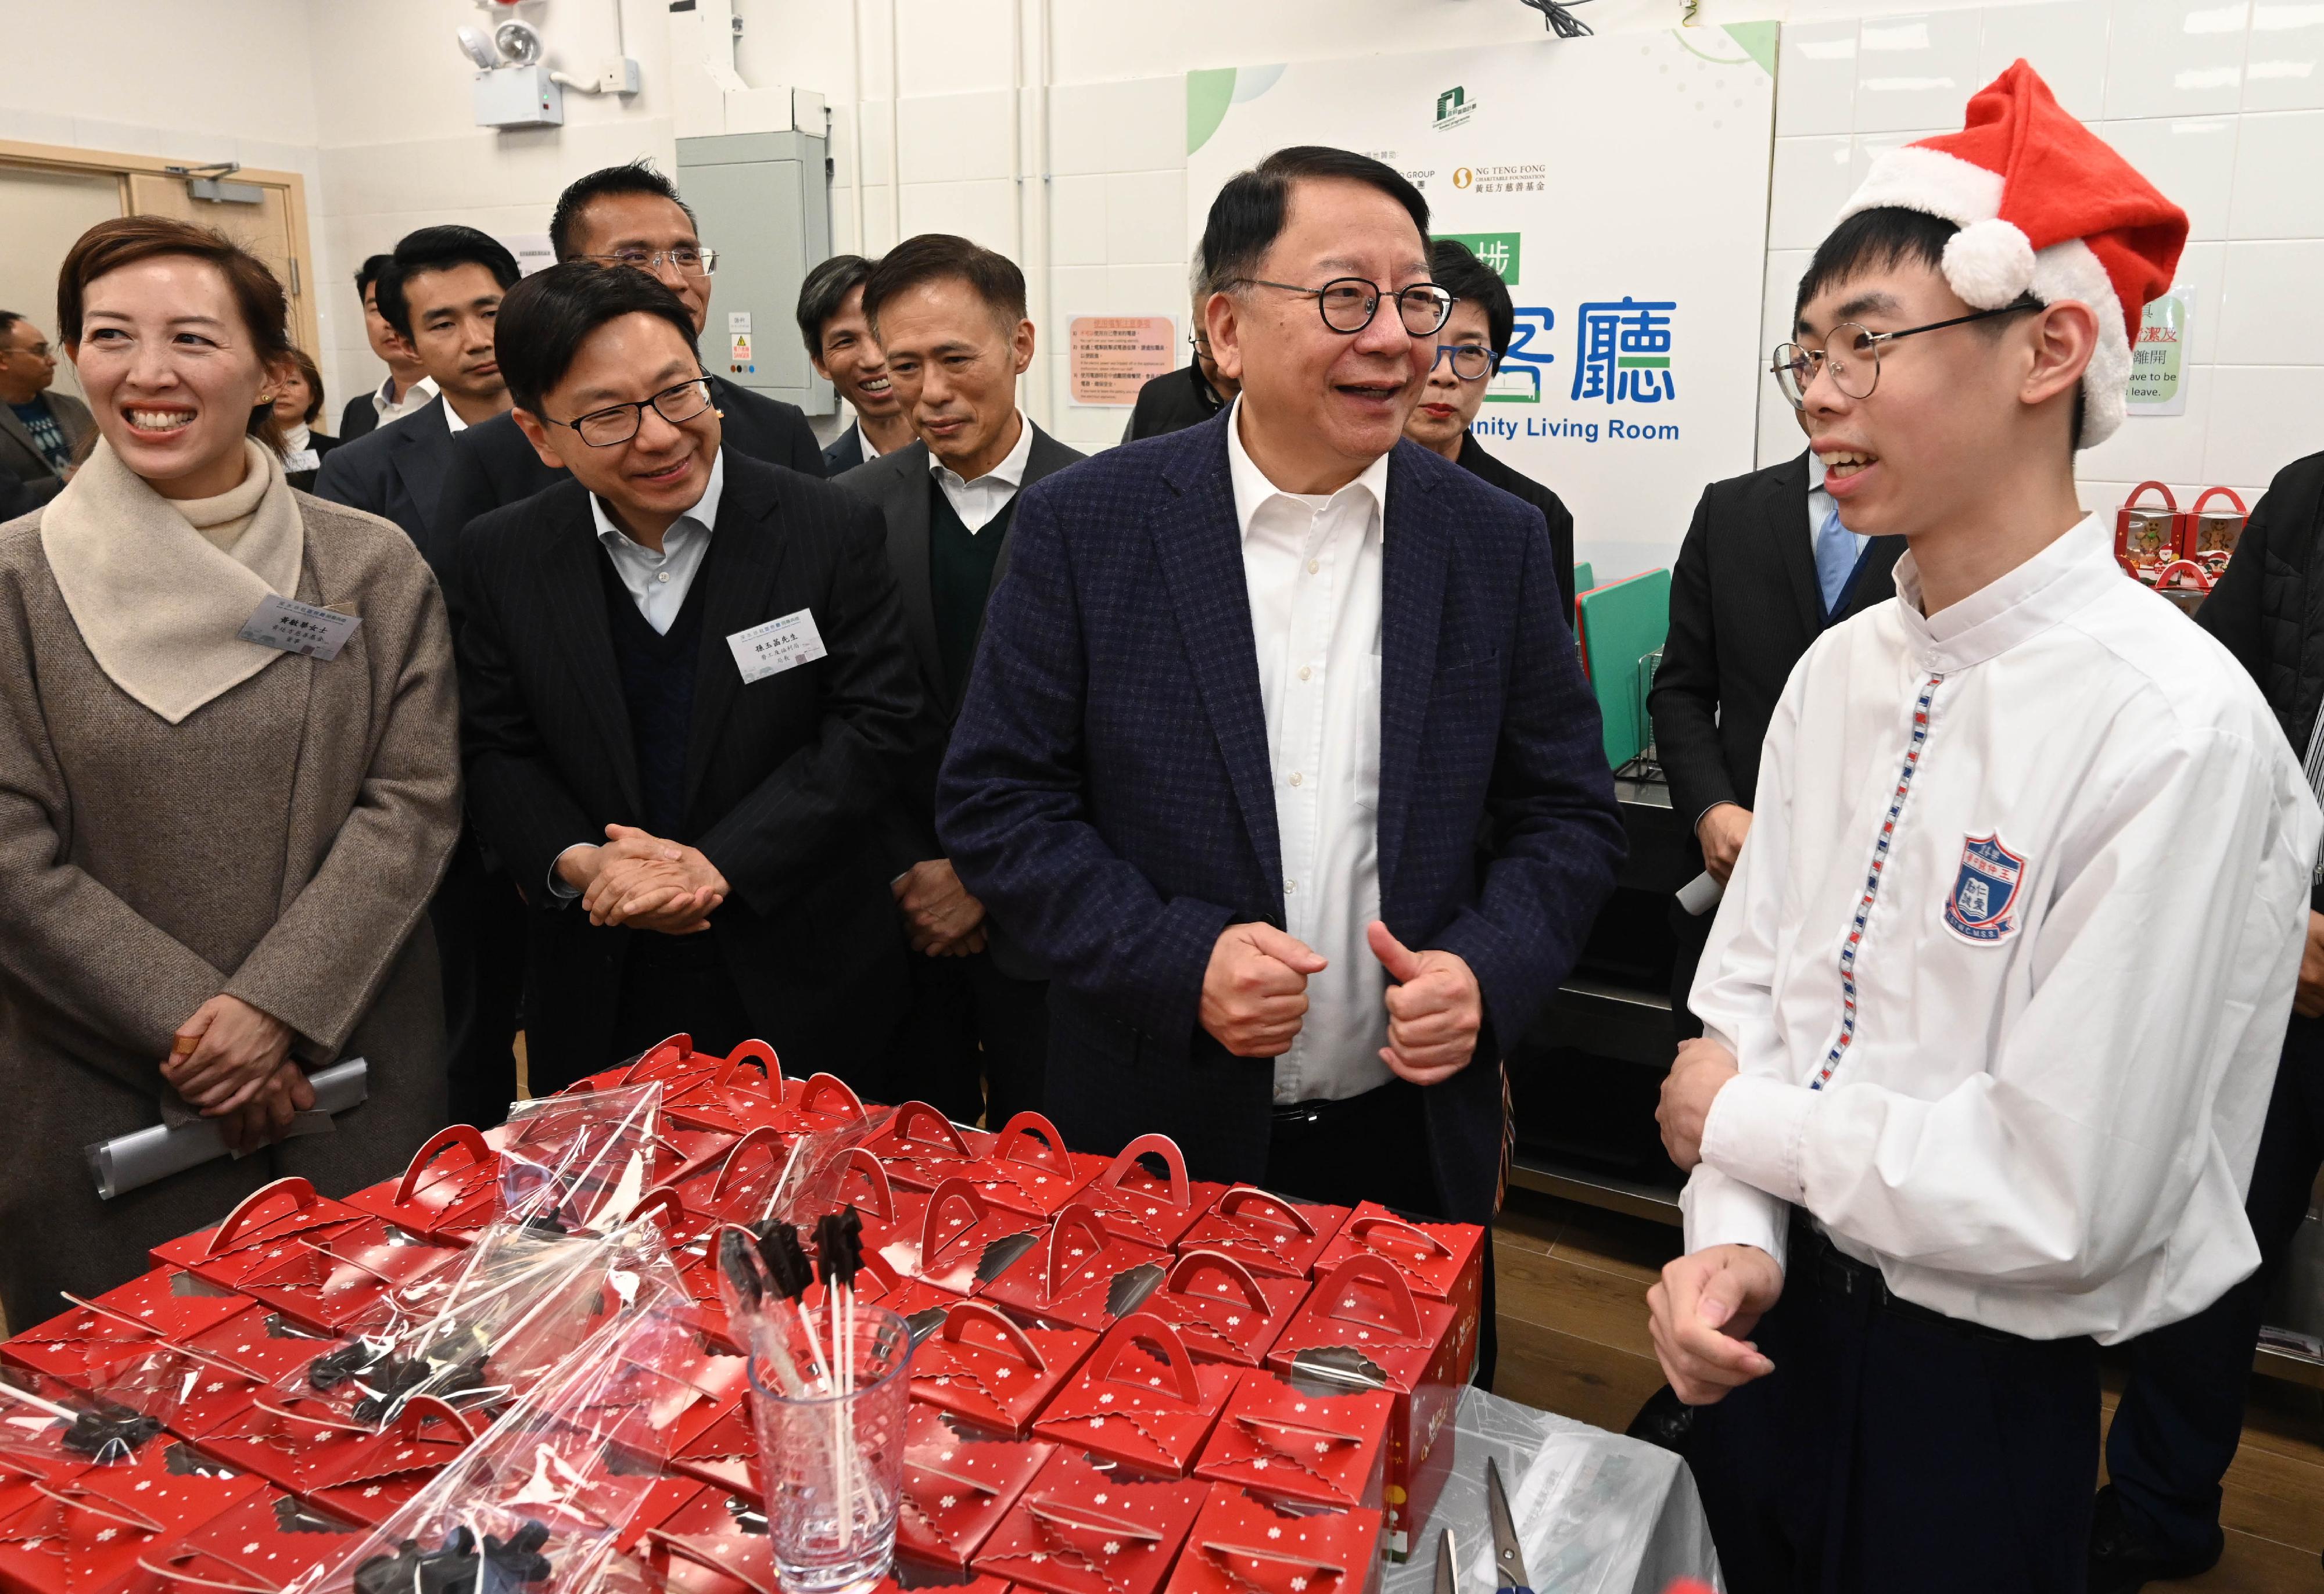 The Chief Secretary for Administration and Chairperson of the Commission on Poverty, Mr Chan Kwok-ki, today (December 18) visited the Sham Shui Po Community Living Room, the first project under the Pilot Programme on Community Living Room. The Secretary for Labour and Welfare, Mr Chris Sun, also joined the visit. Photo shows Mr Chan (front row, second right) and Mr Sun (front row, third right) watching sub-divided unit households preparing Christmas foods in the shared pantry.